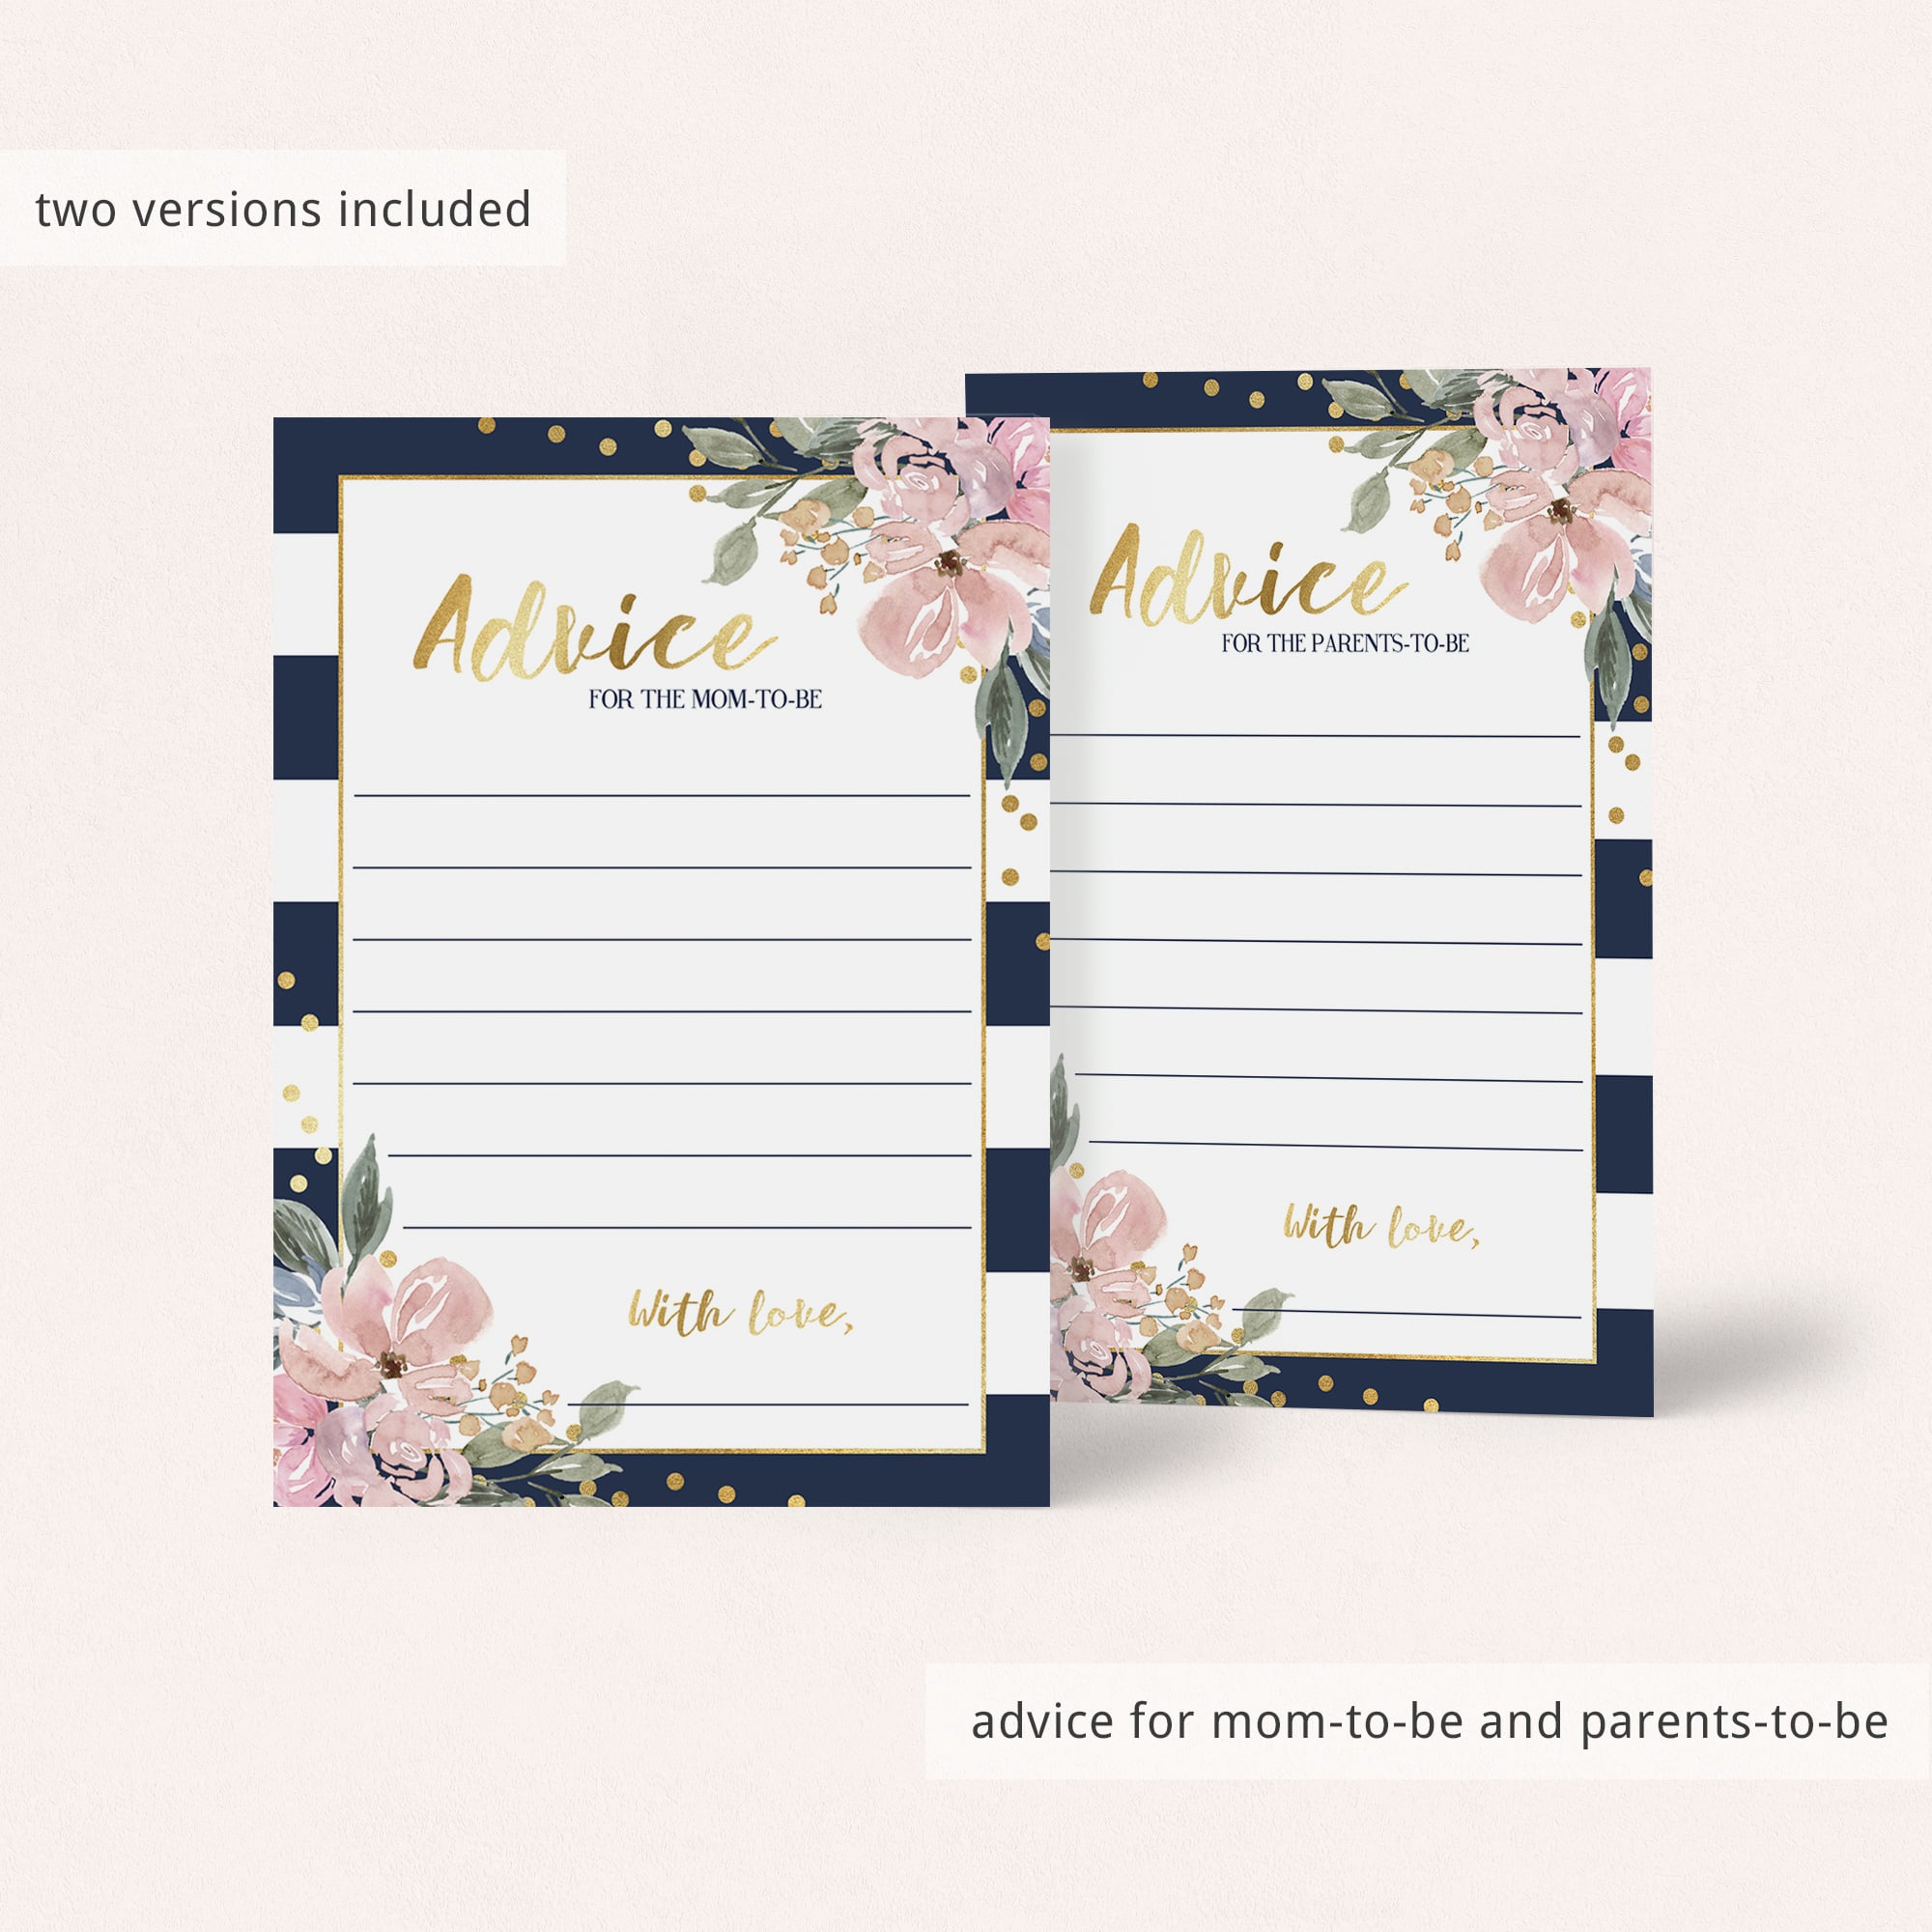 Printable advice cards for baby showers by LittleSizzle